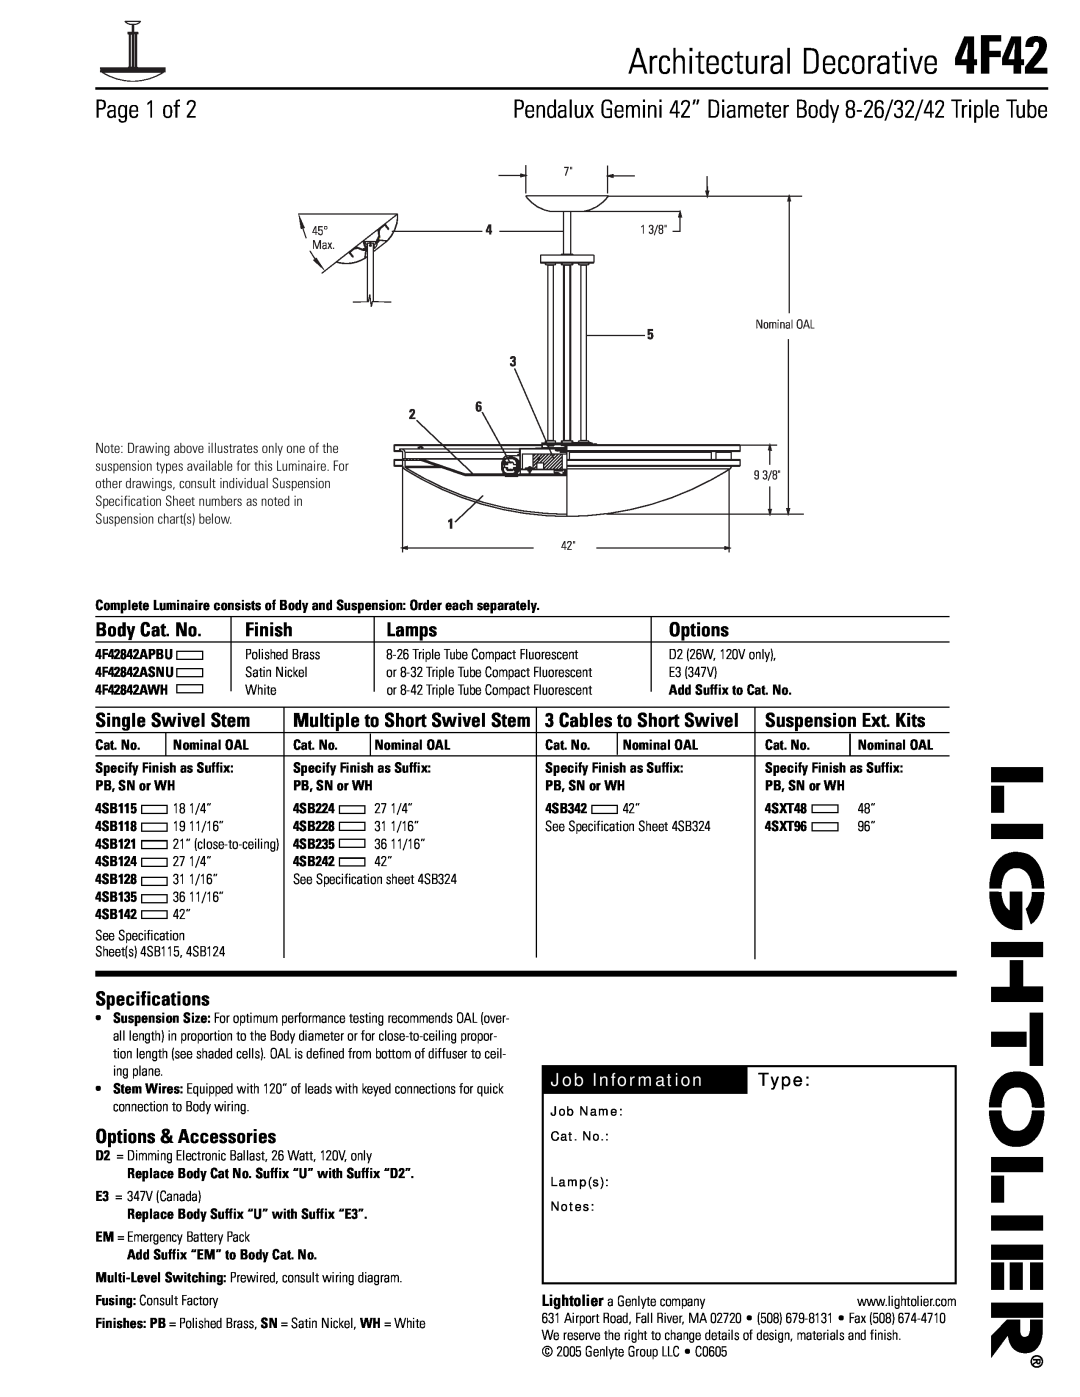 Lightolier specifications Architectural Decorative 4F42, Page 1 of, Body Cat. No, Finish, Lamps, Options, Type 